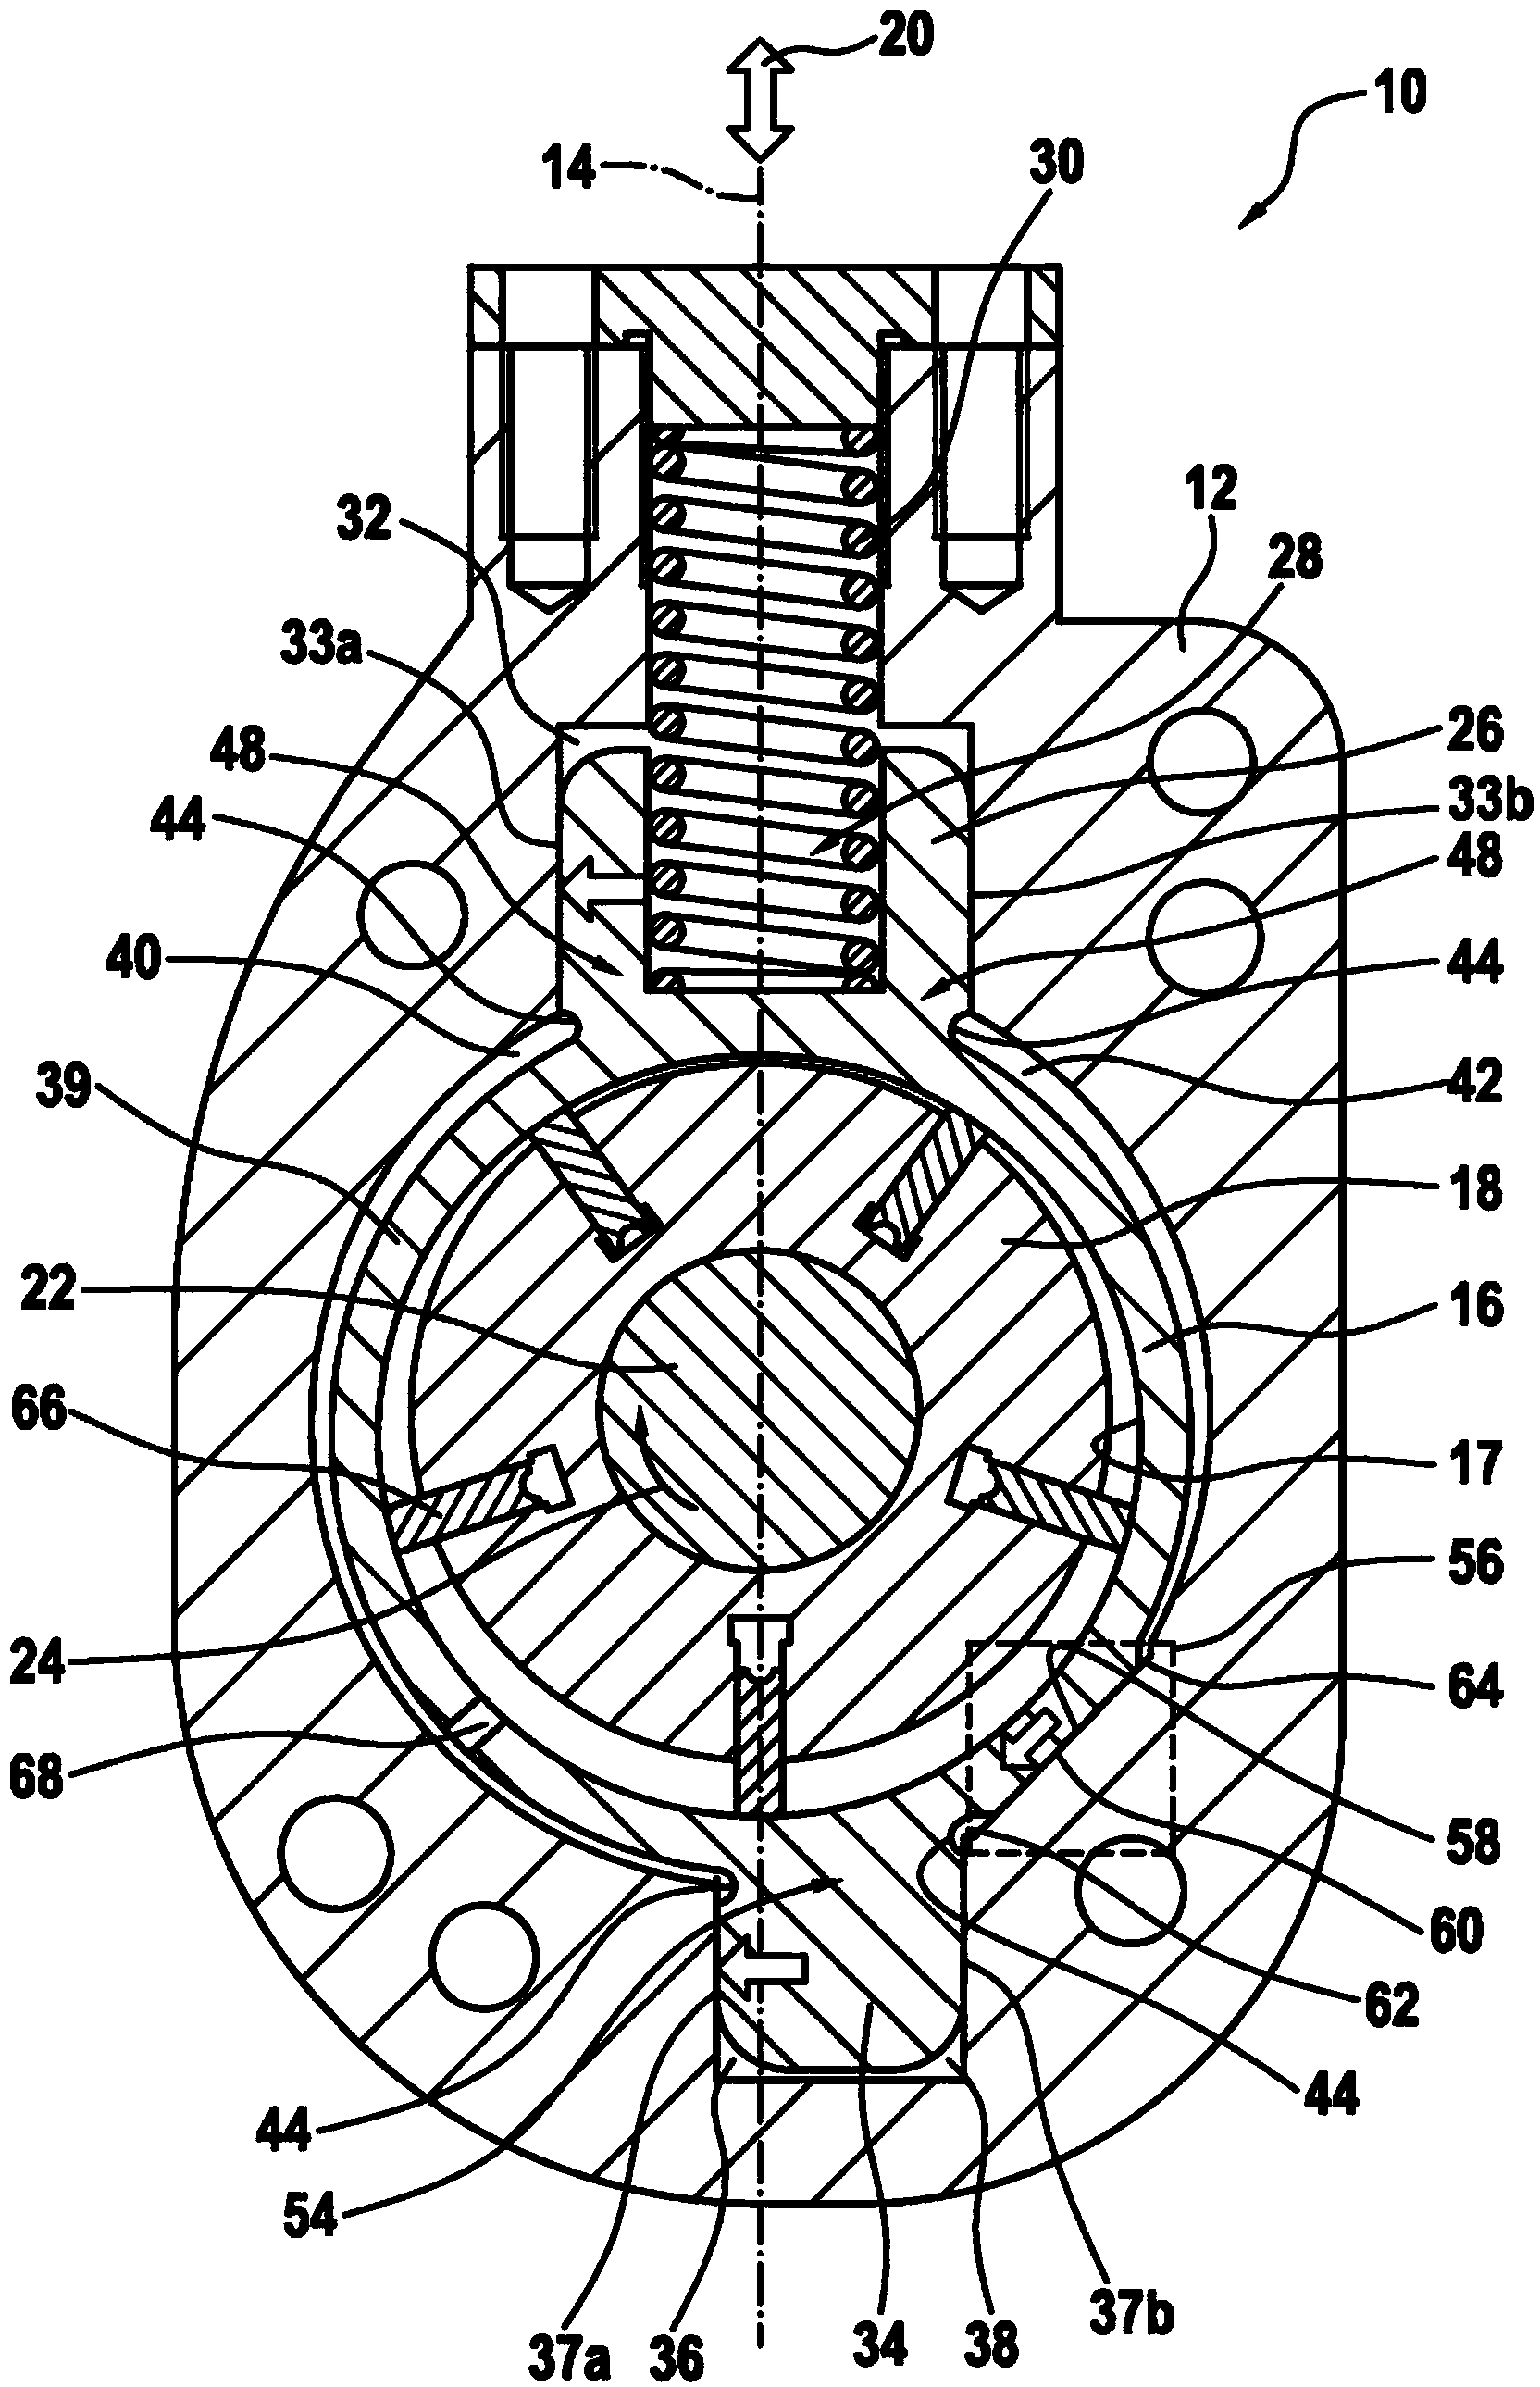 Vane-type pump having a housing, having a displaceable stator, and having a rotor that is rotatable within the stator